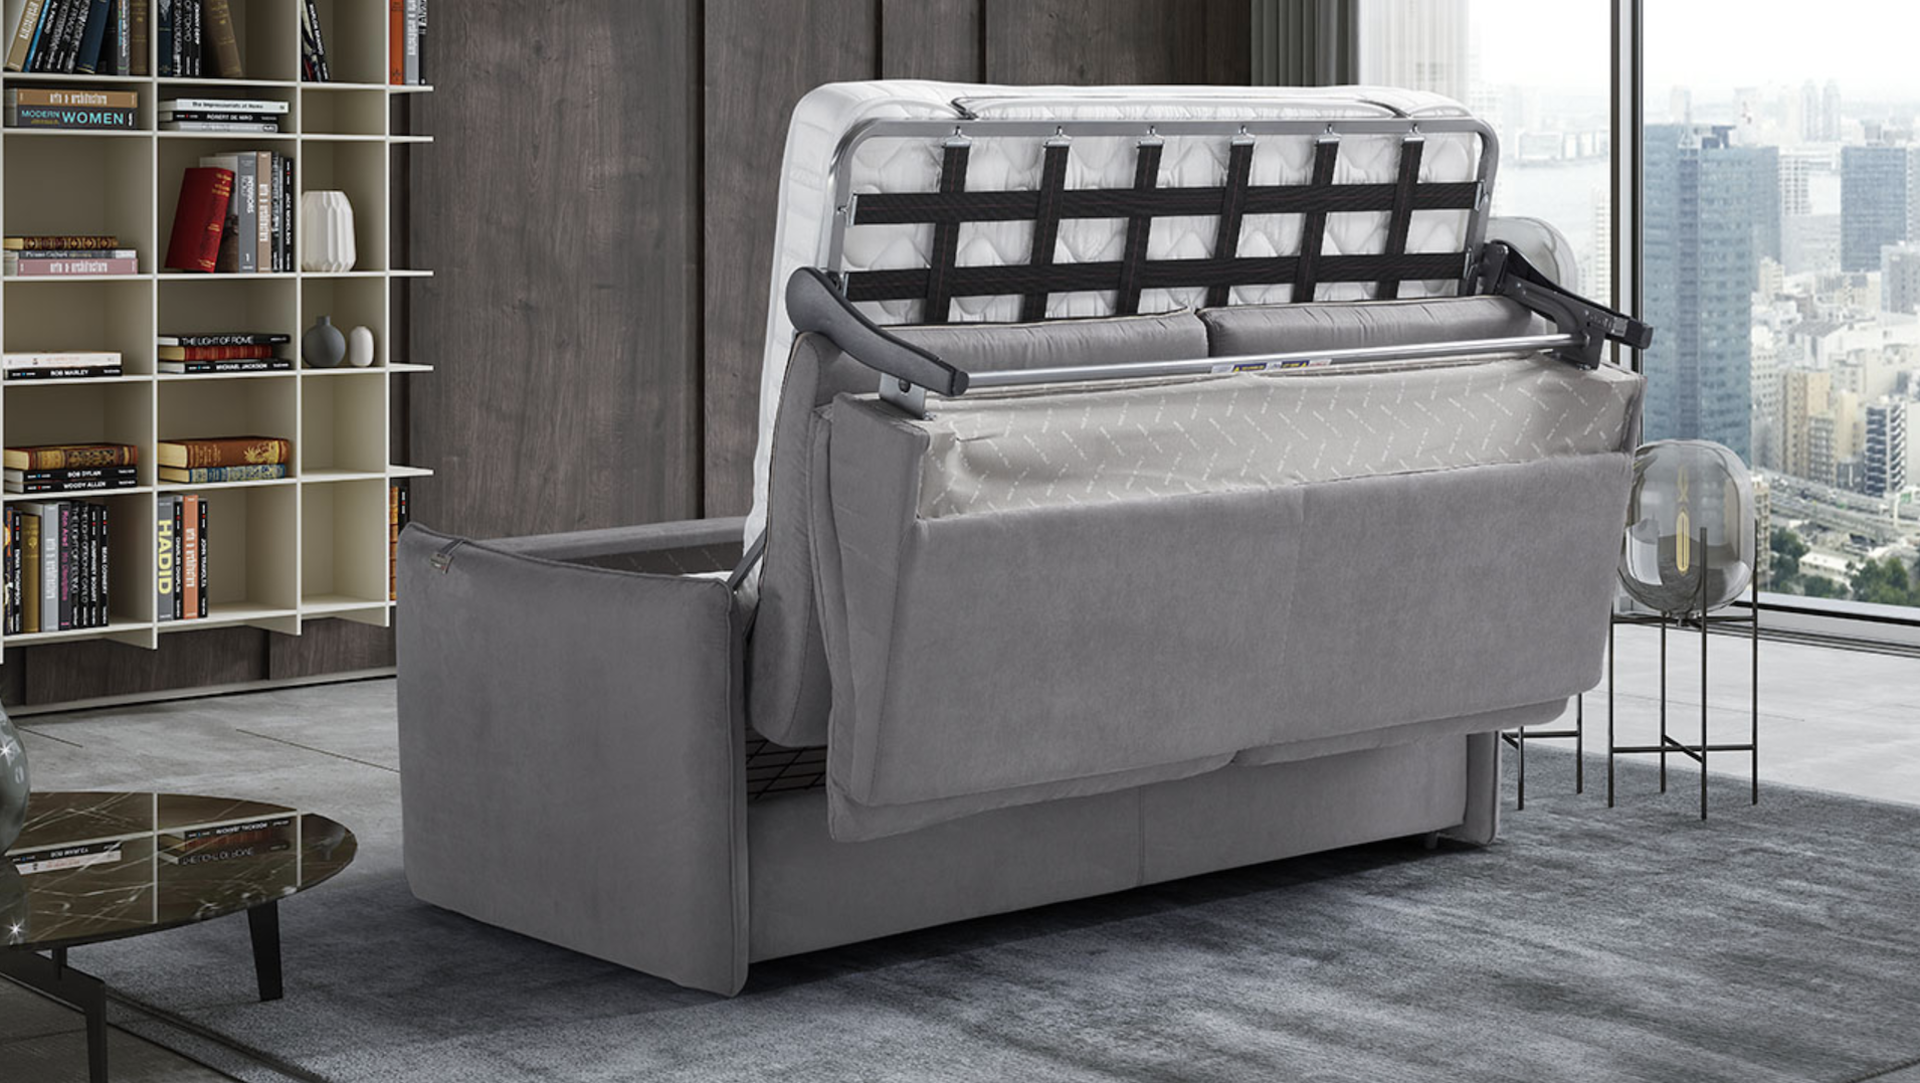 ‘AIMEE’ Italian Crafted 3 Seat Sofa Bed in PLAZA SILVER RRP £1979 - Image 3 of 5